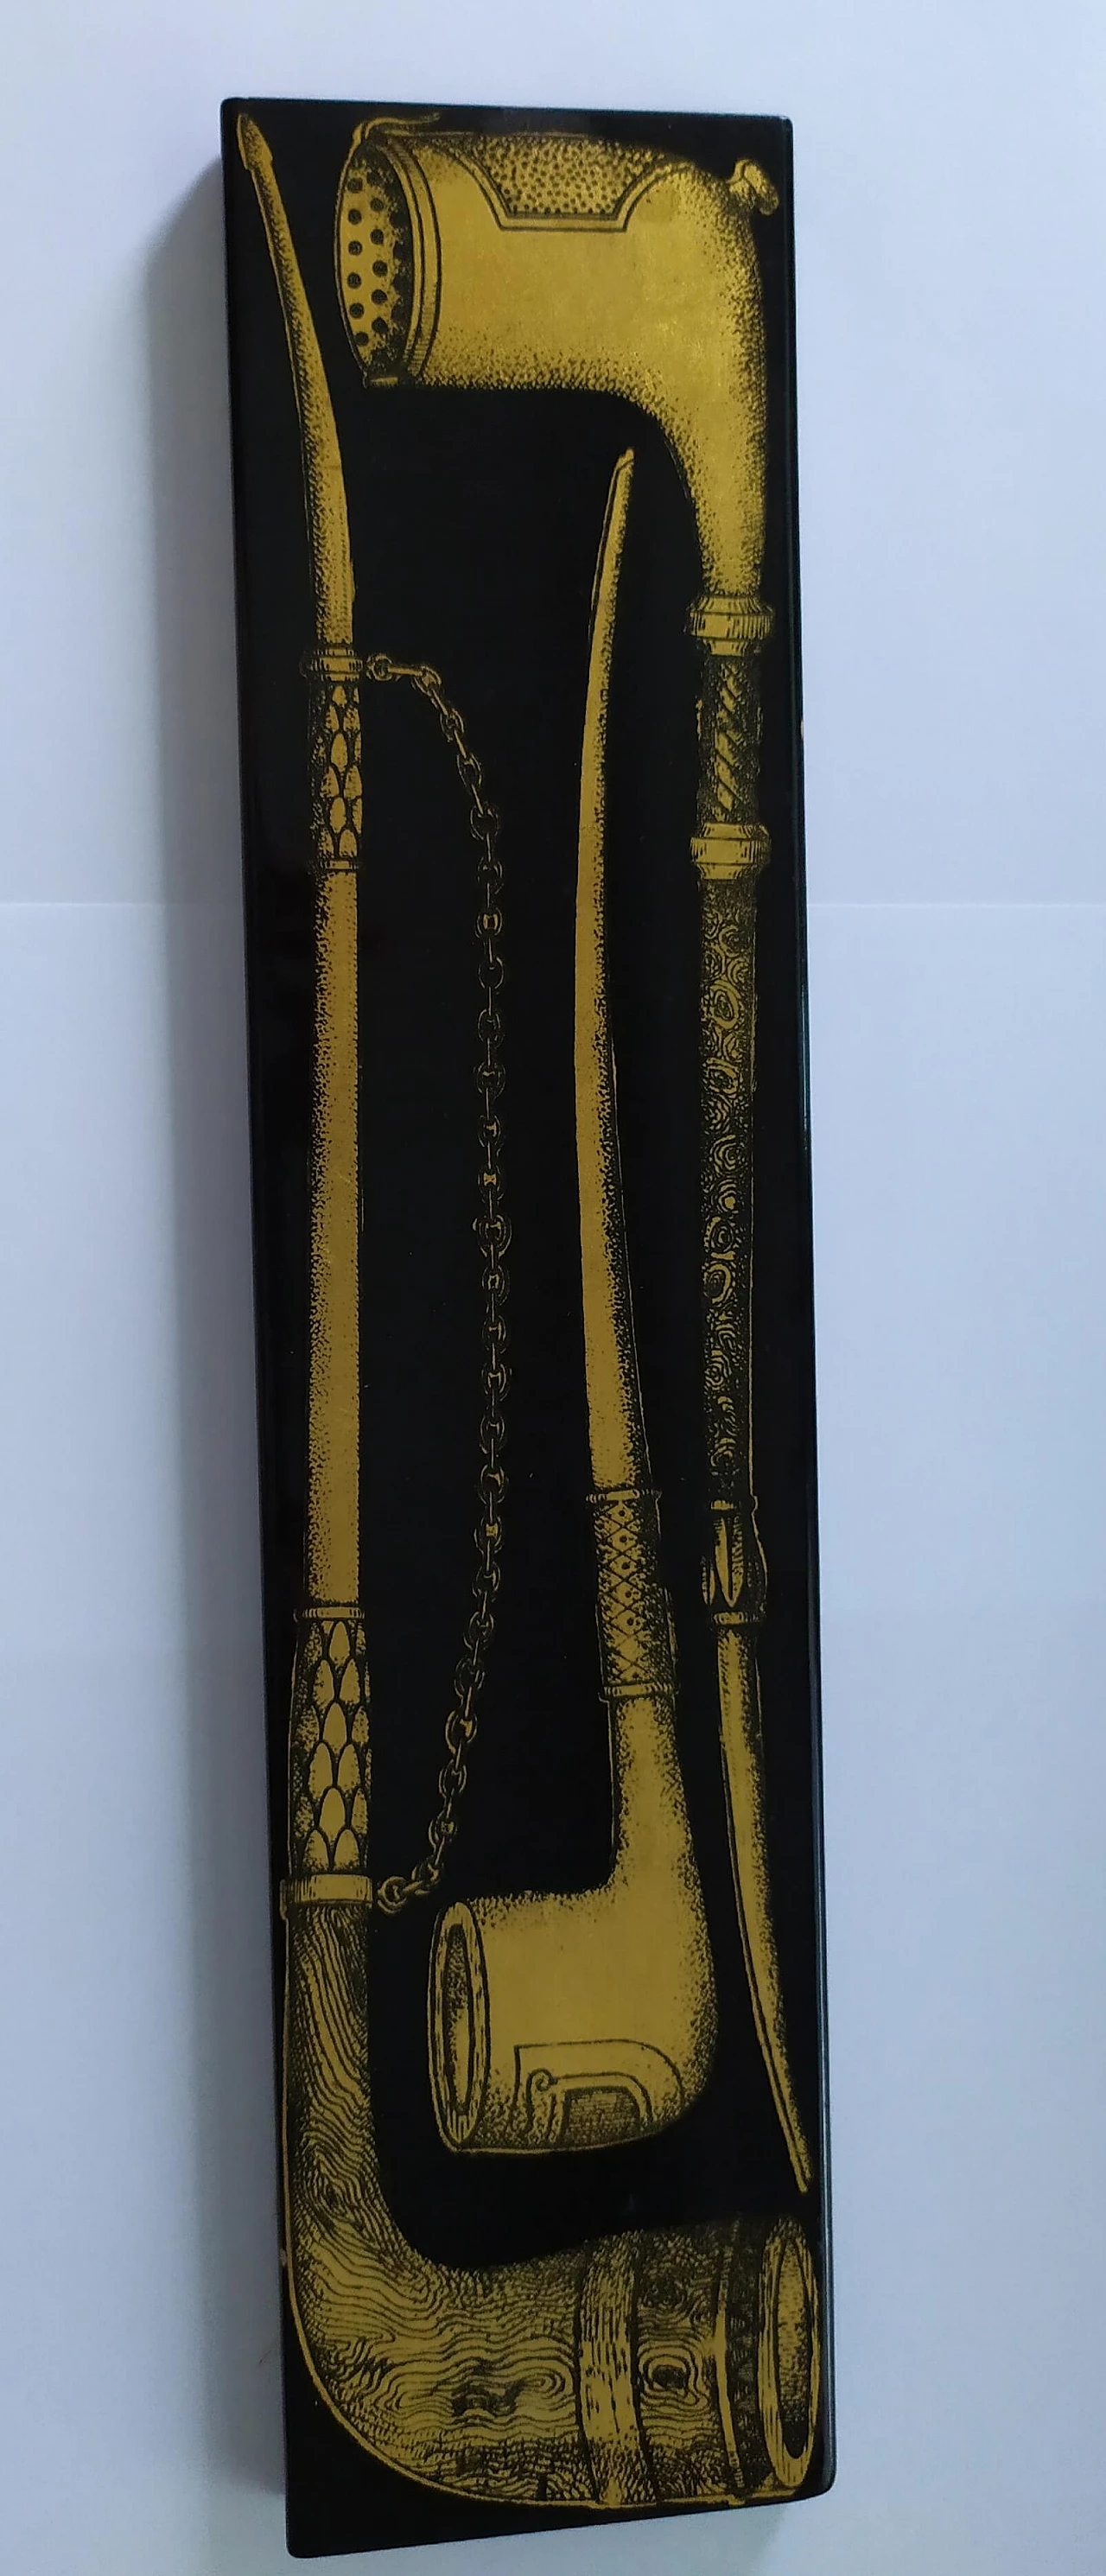 Flame box by Piero Fornasetti, 1960s 1273059